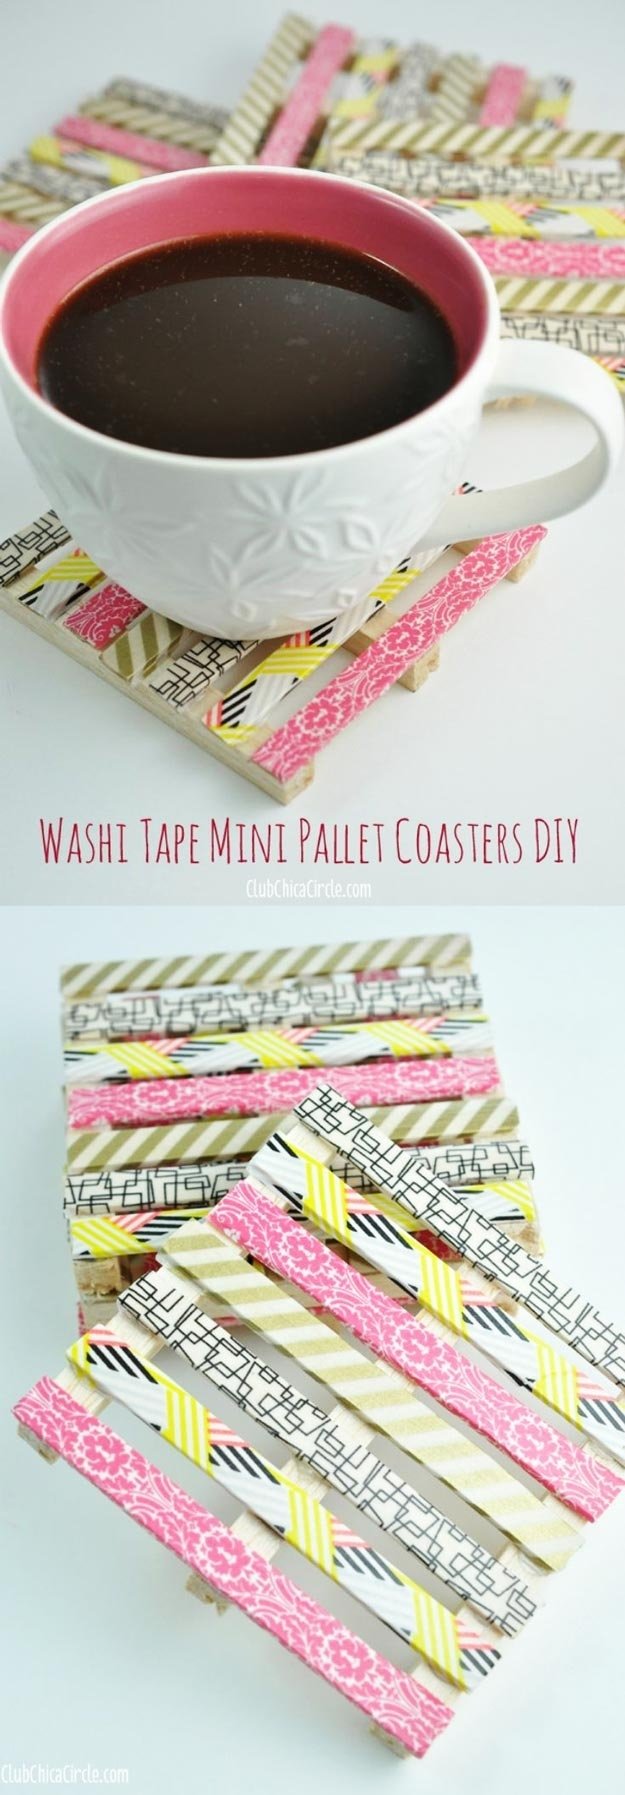 10 Awesome Craft Ideas To Make And Sell washi tape mini wood pallet coasters 9 2022